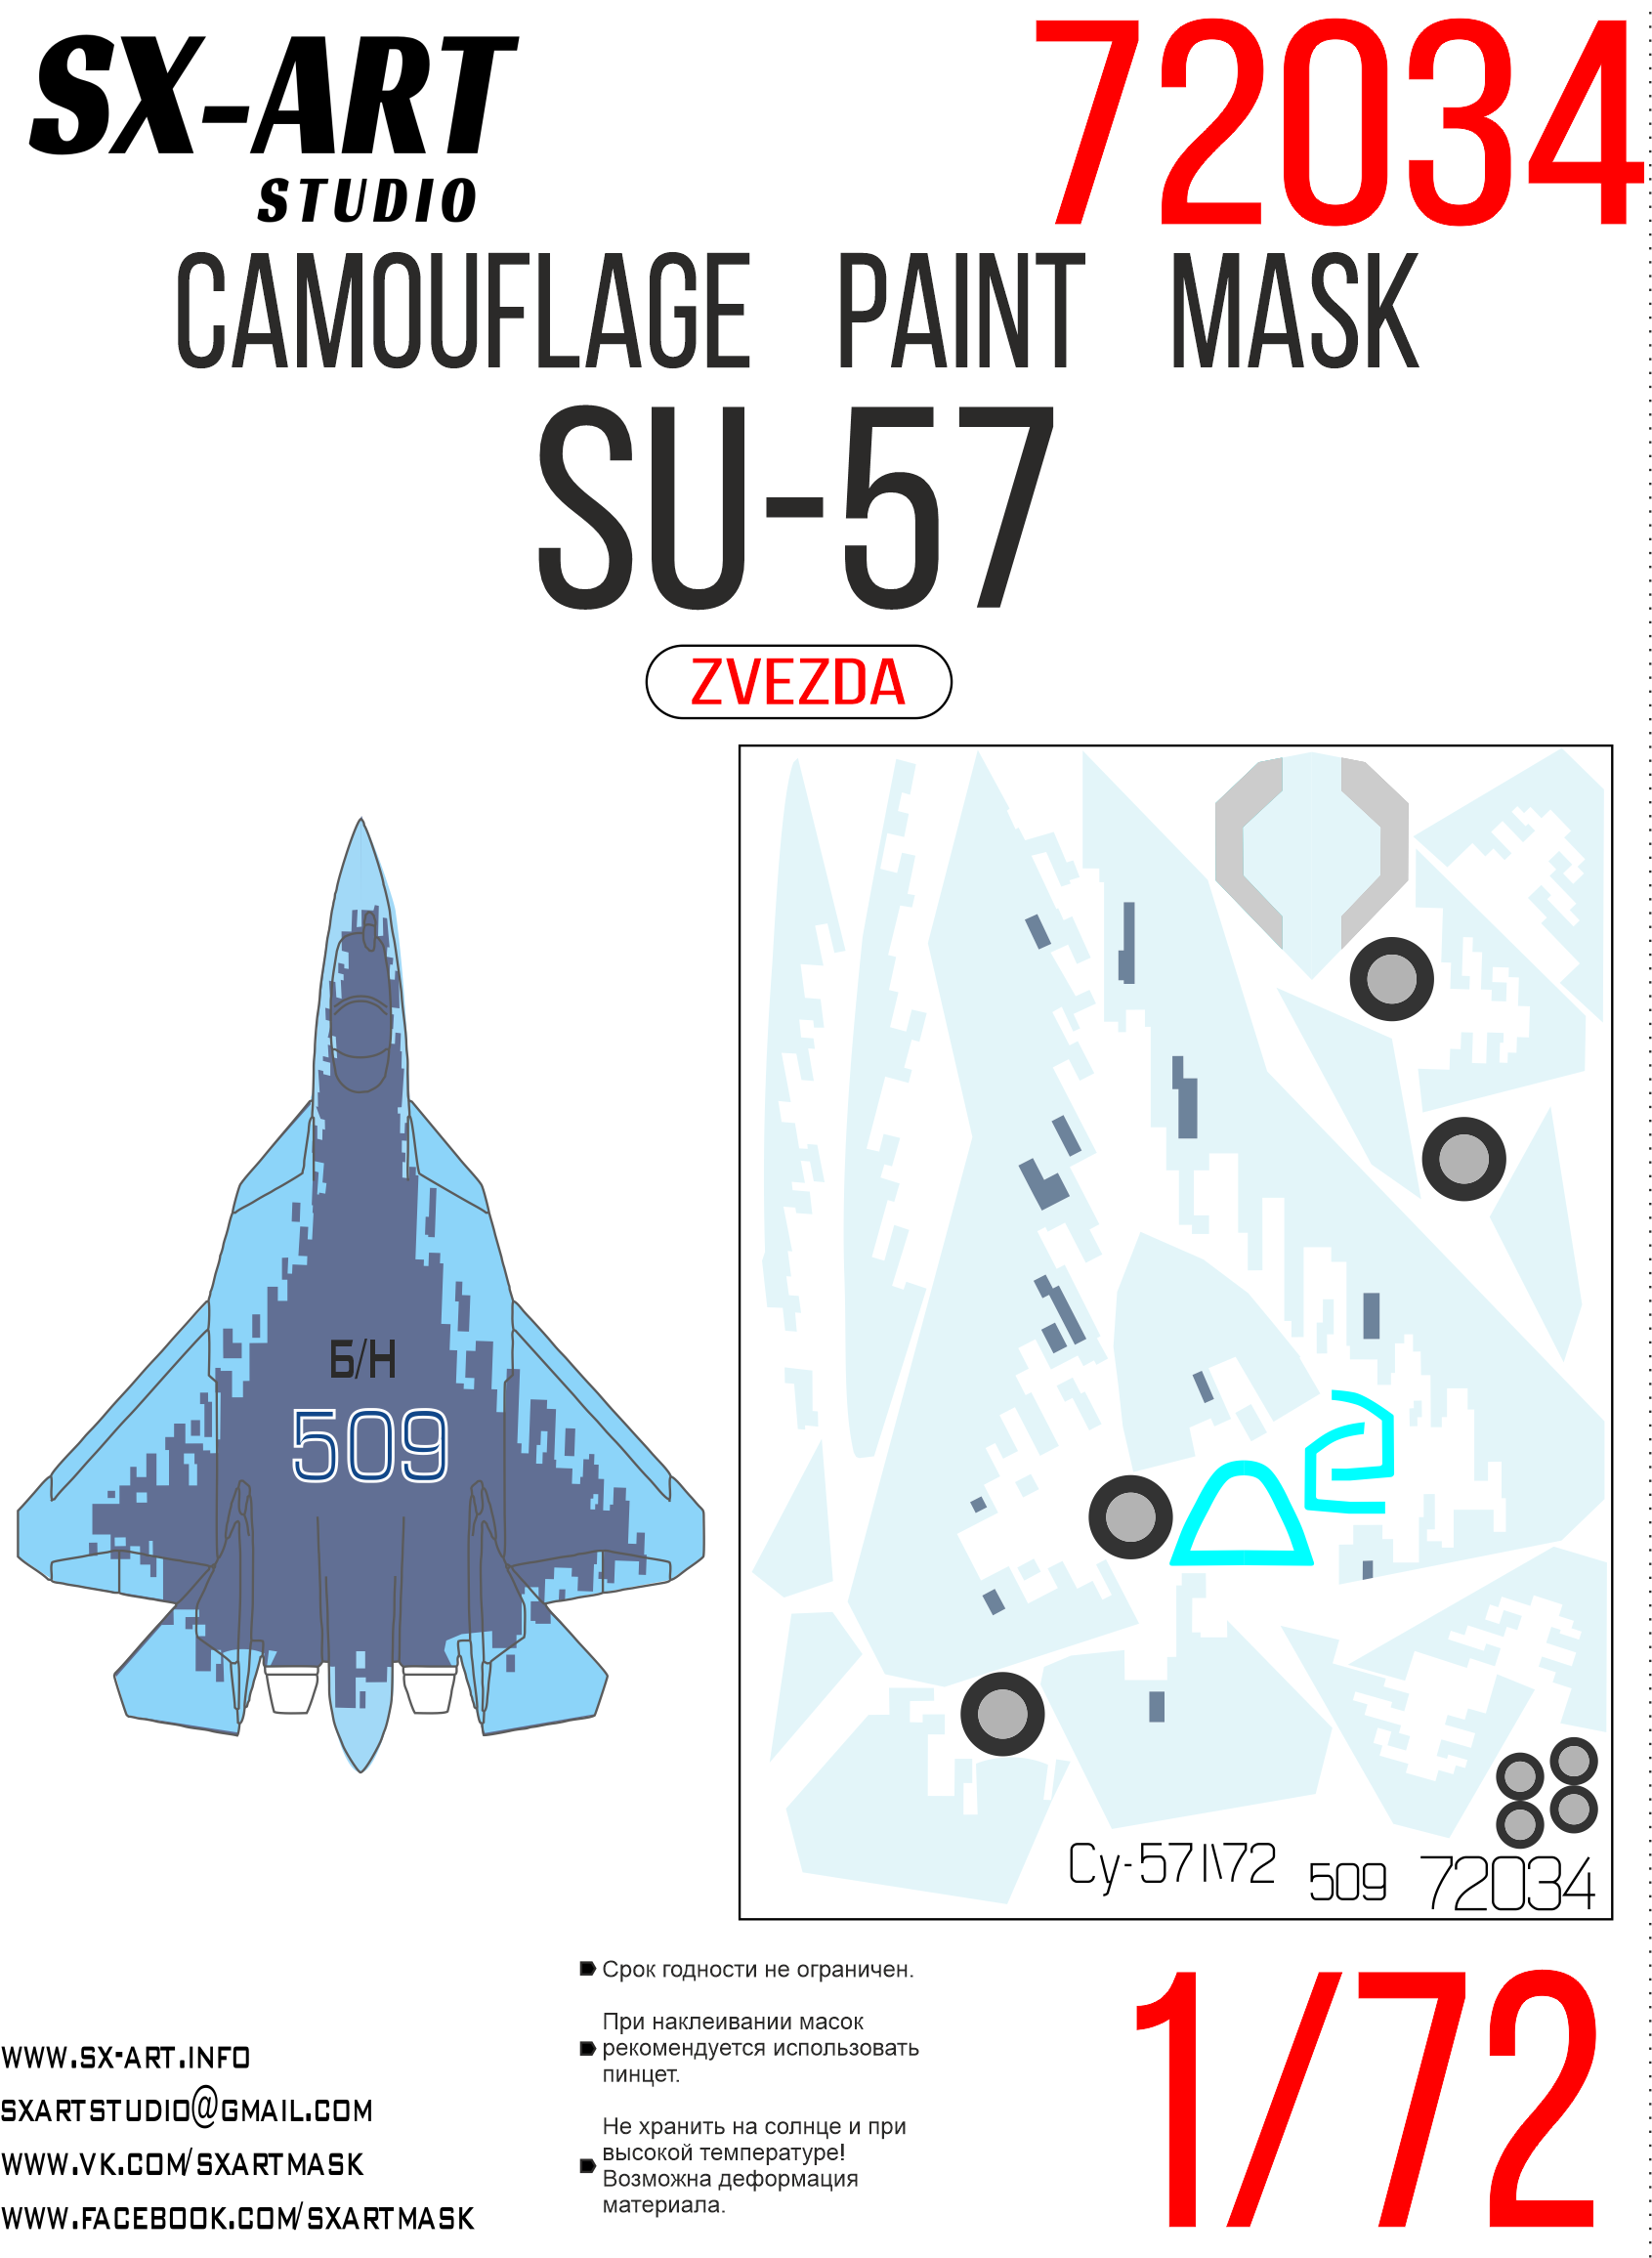 Camouflage mask 1/72 Su-57 board 509 (Zvezda) includes masks on the lantern and wheels